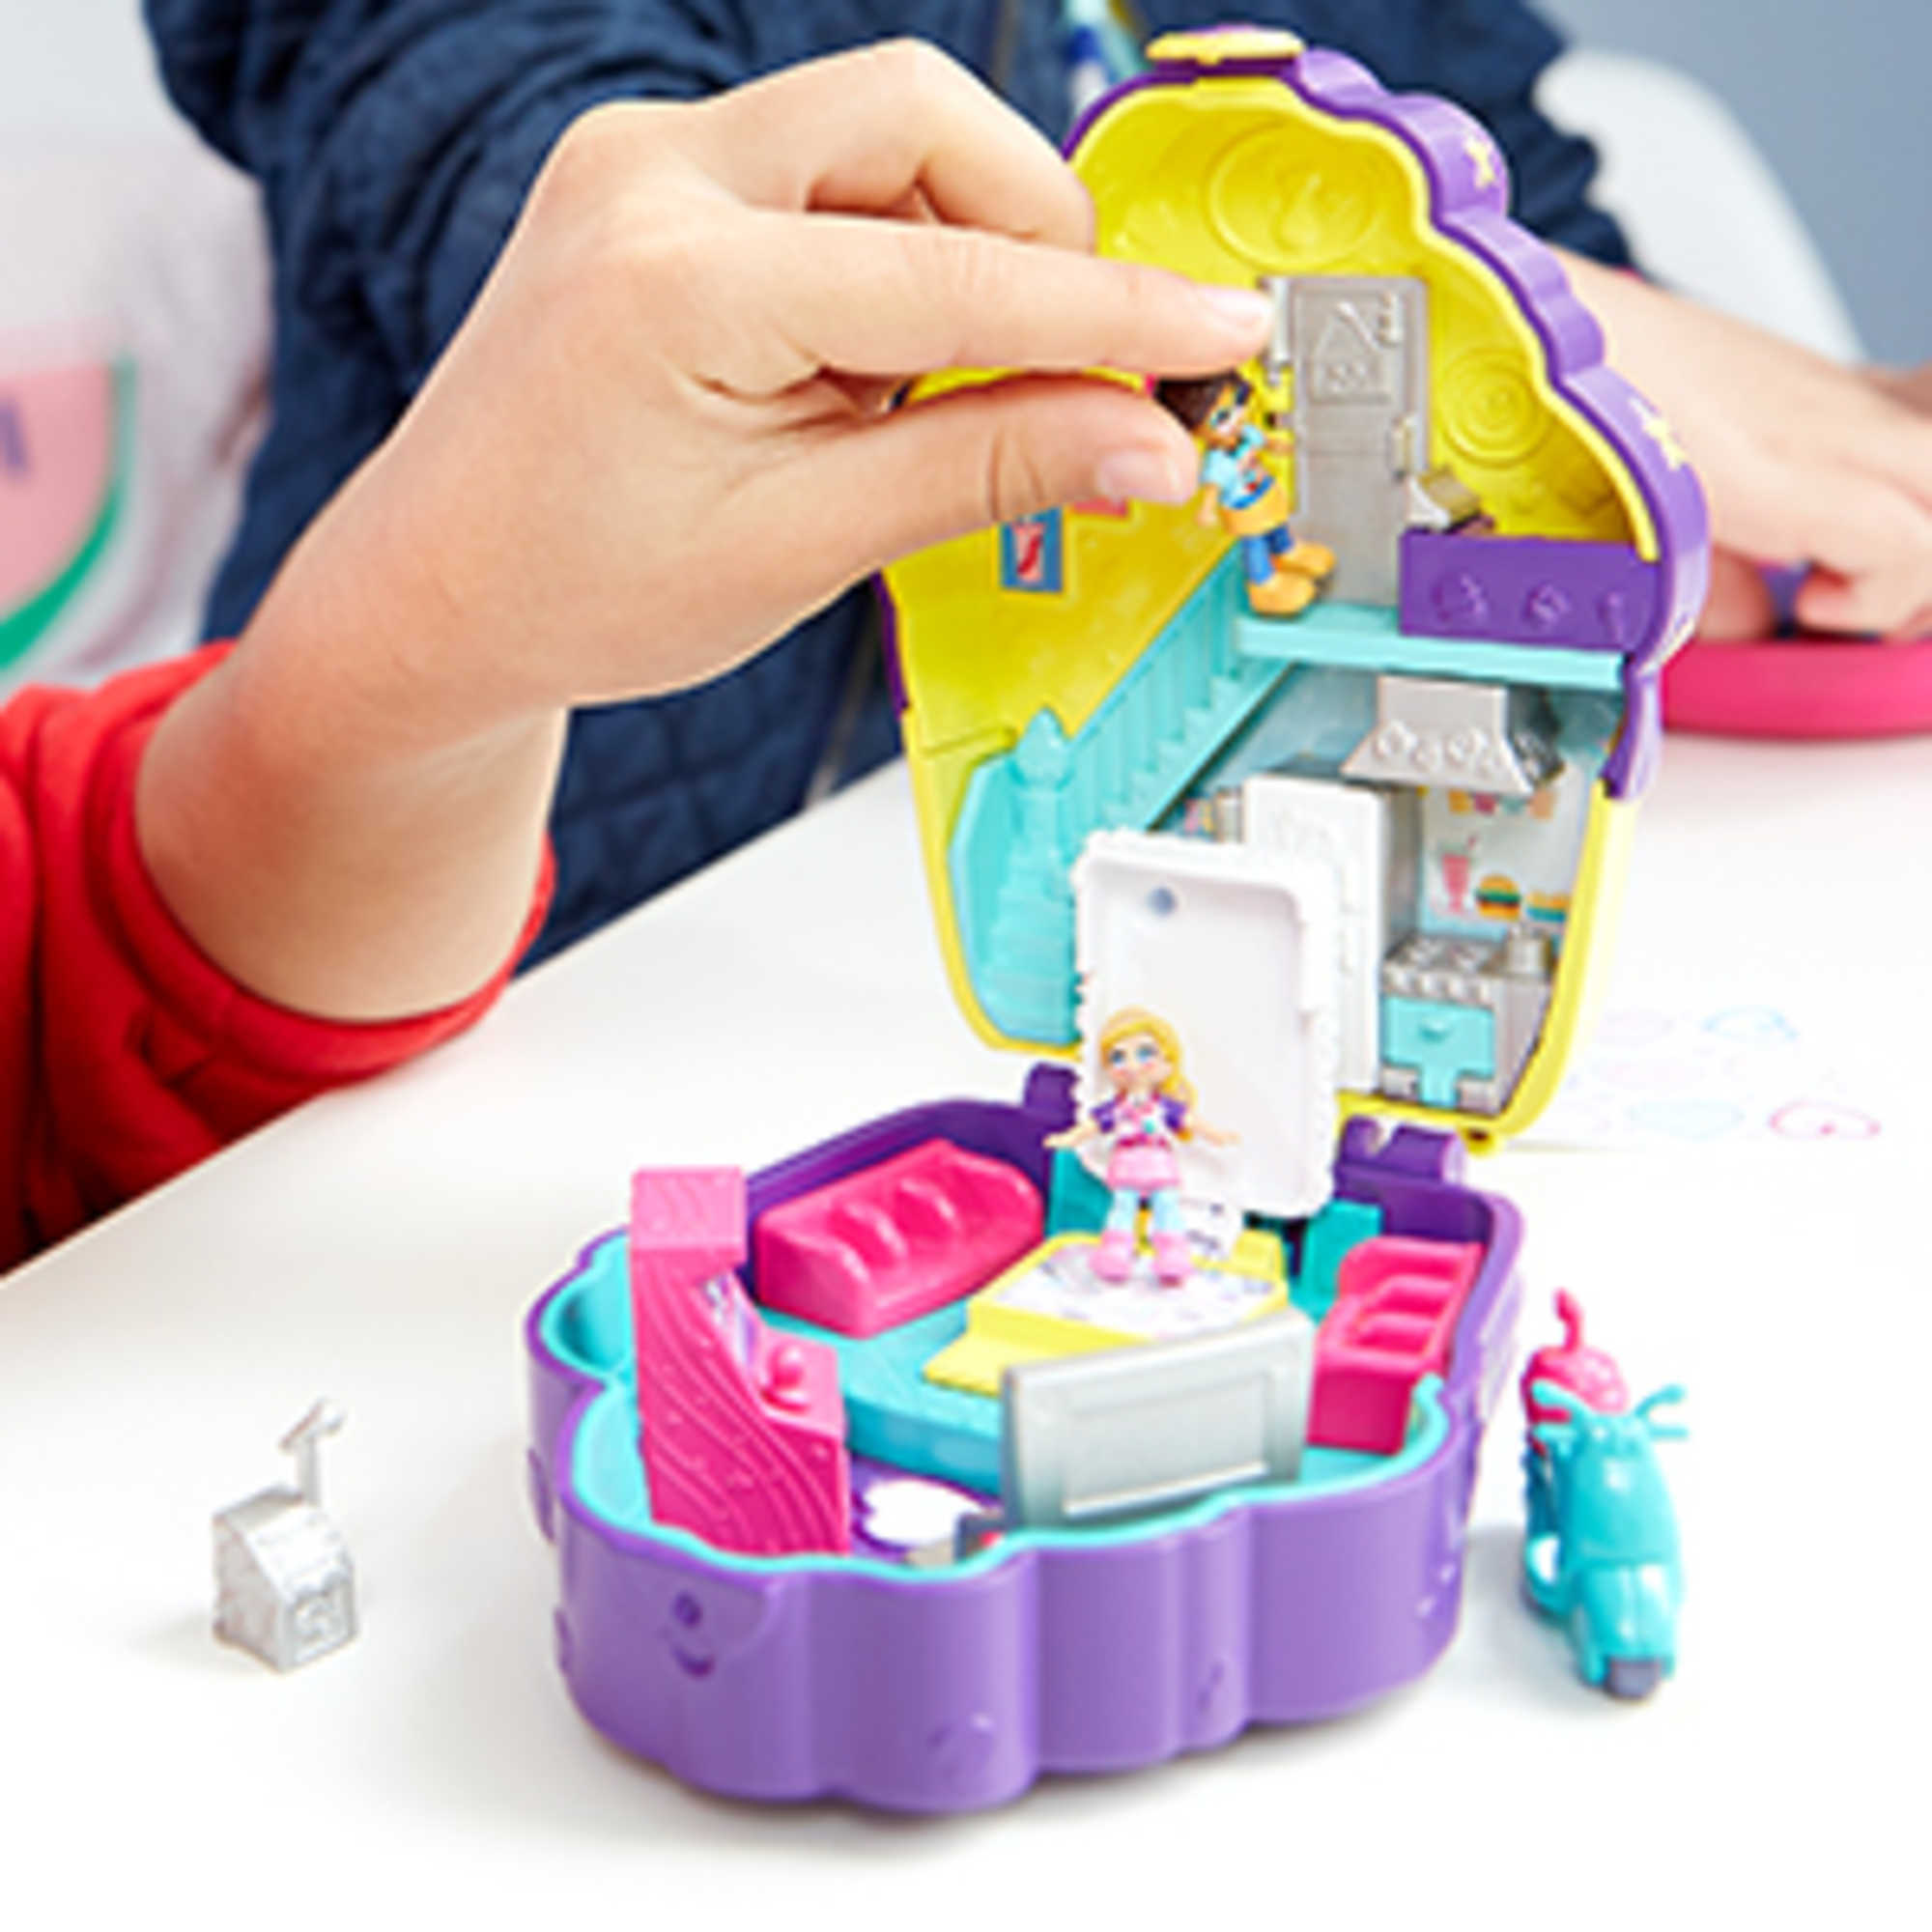 Polly Pocket Pocket Sweet Treat Cupcake Cafe-Themed Compact with Dolls - image 4 of 8